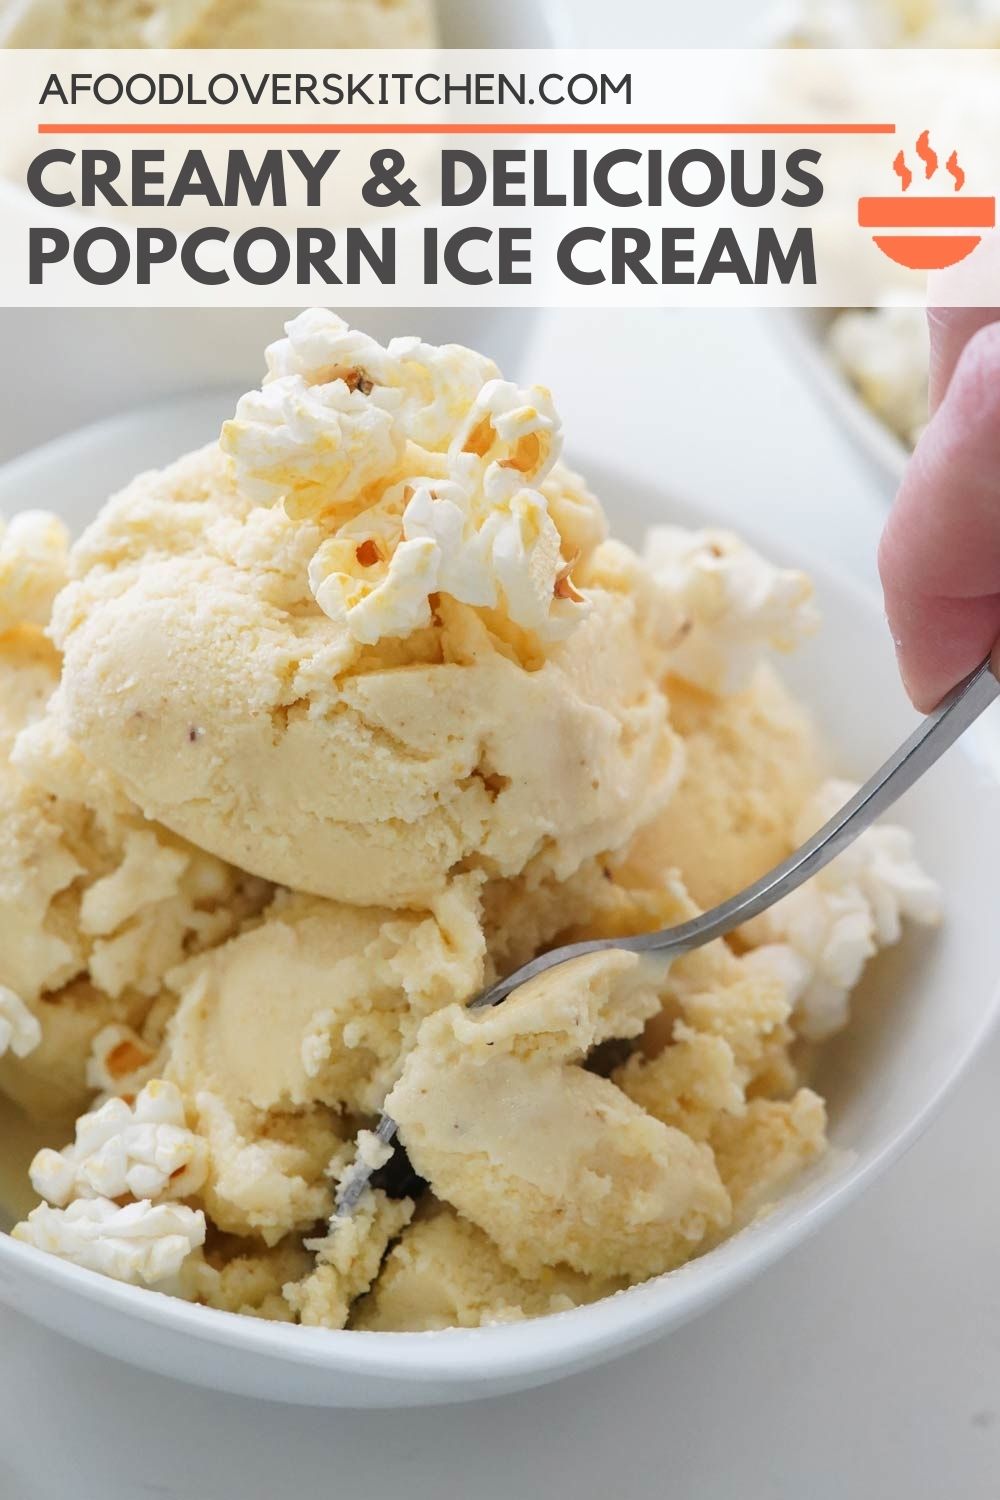 Popcorn ice cream in a bowl with popcorn on top